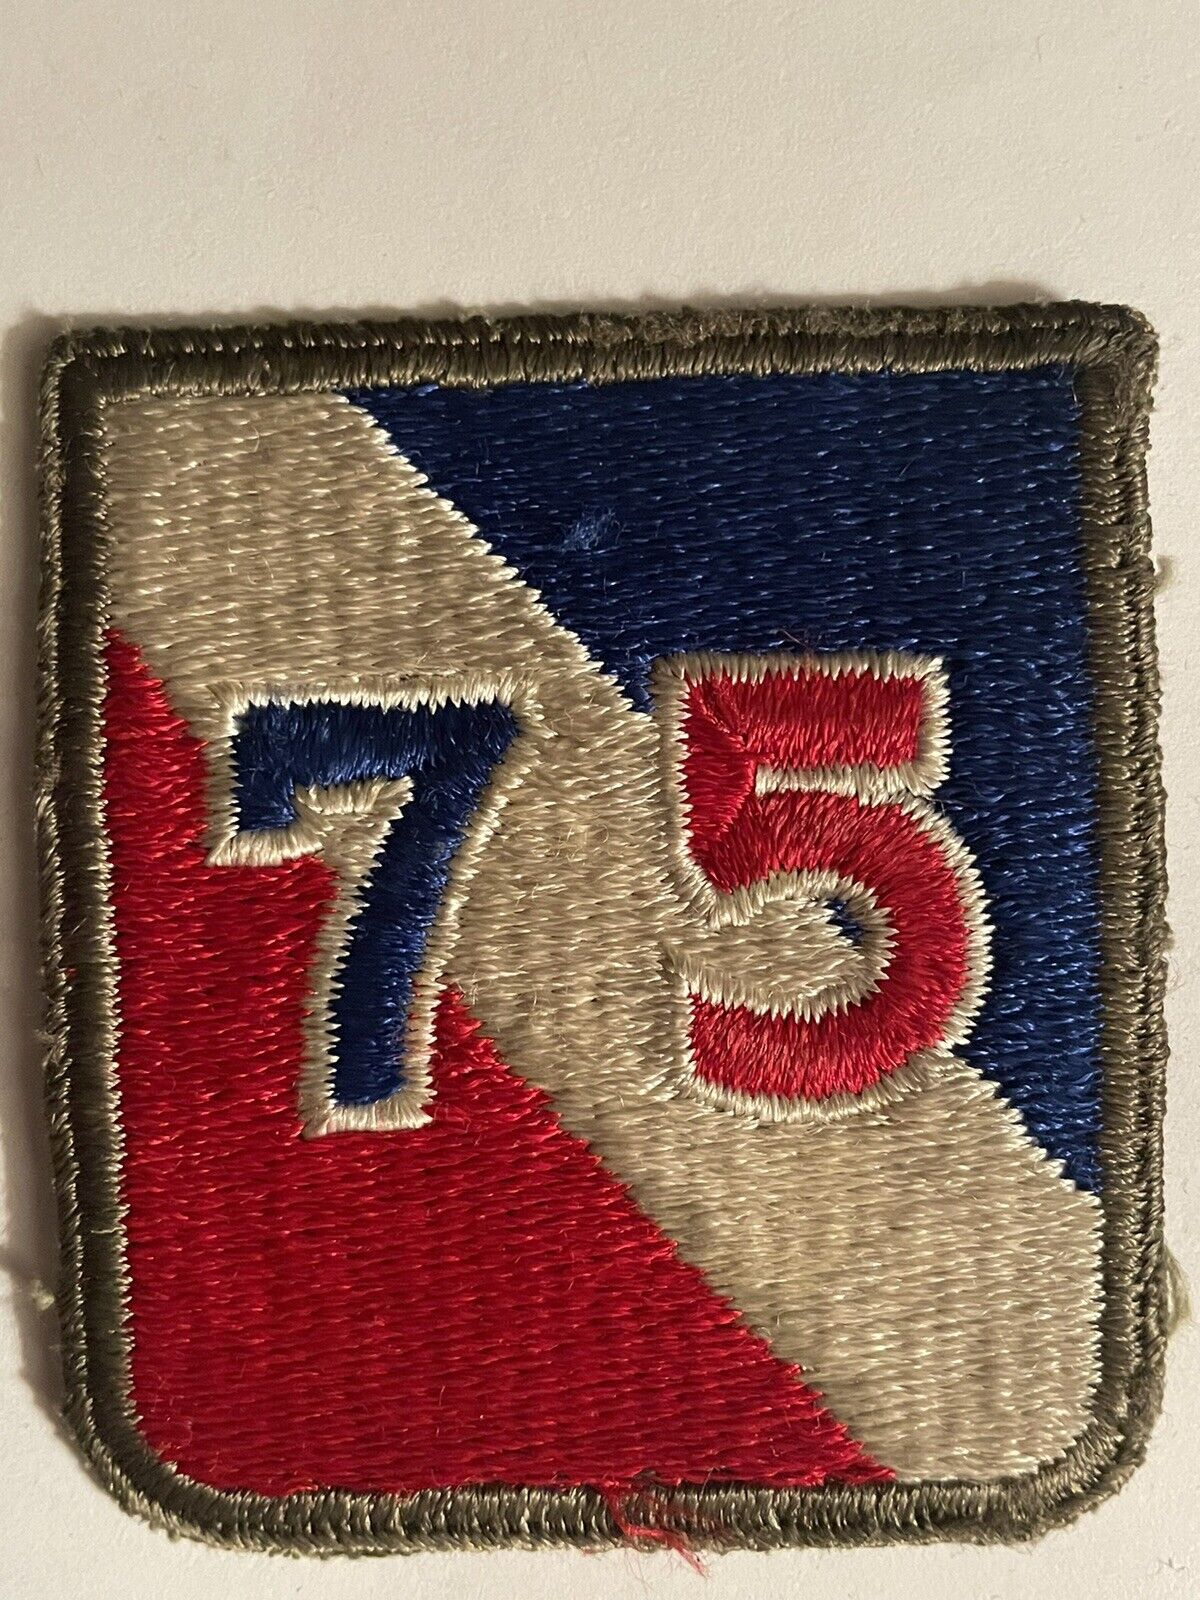 WW2 75th Infantry Division Patch (ID)